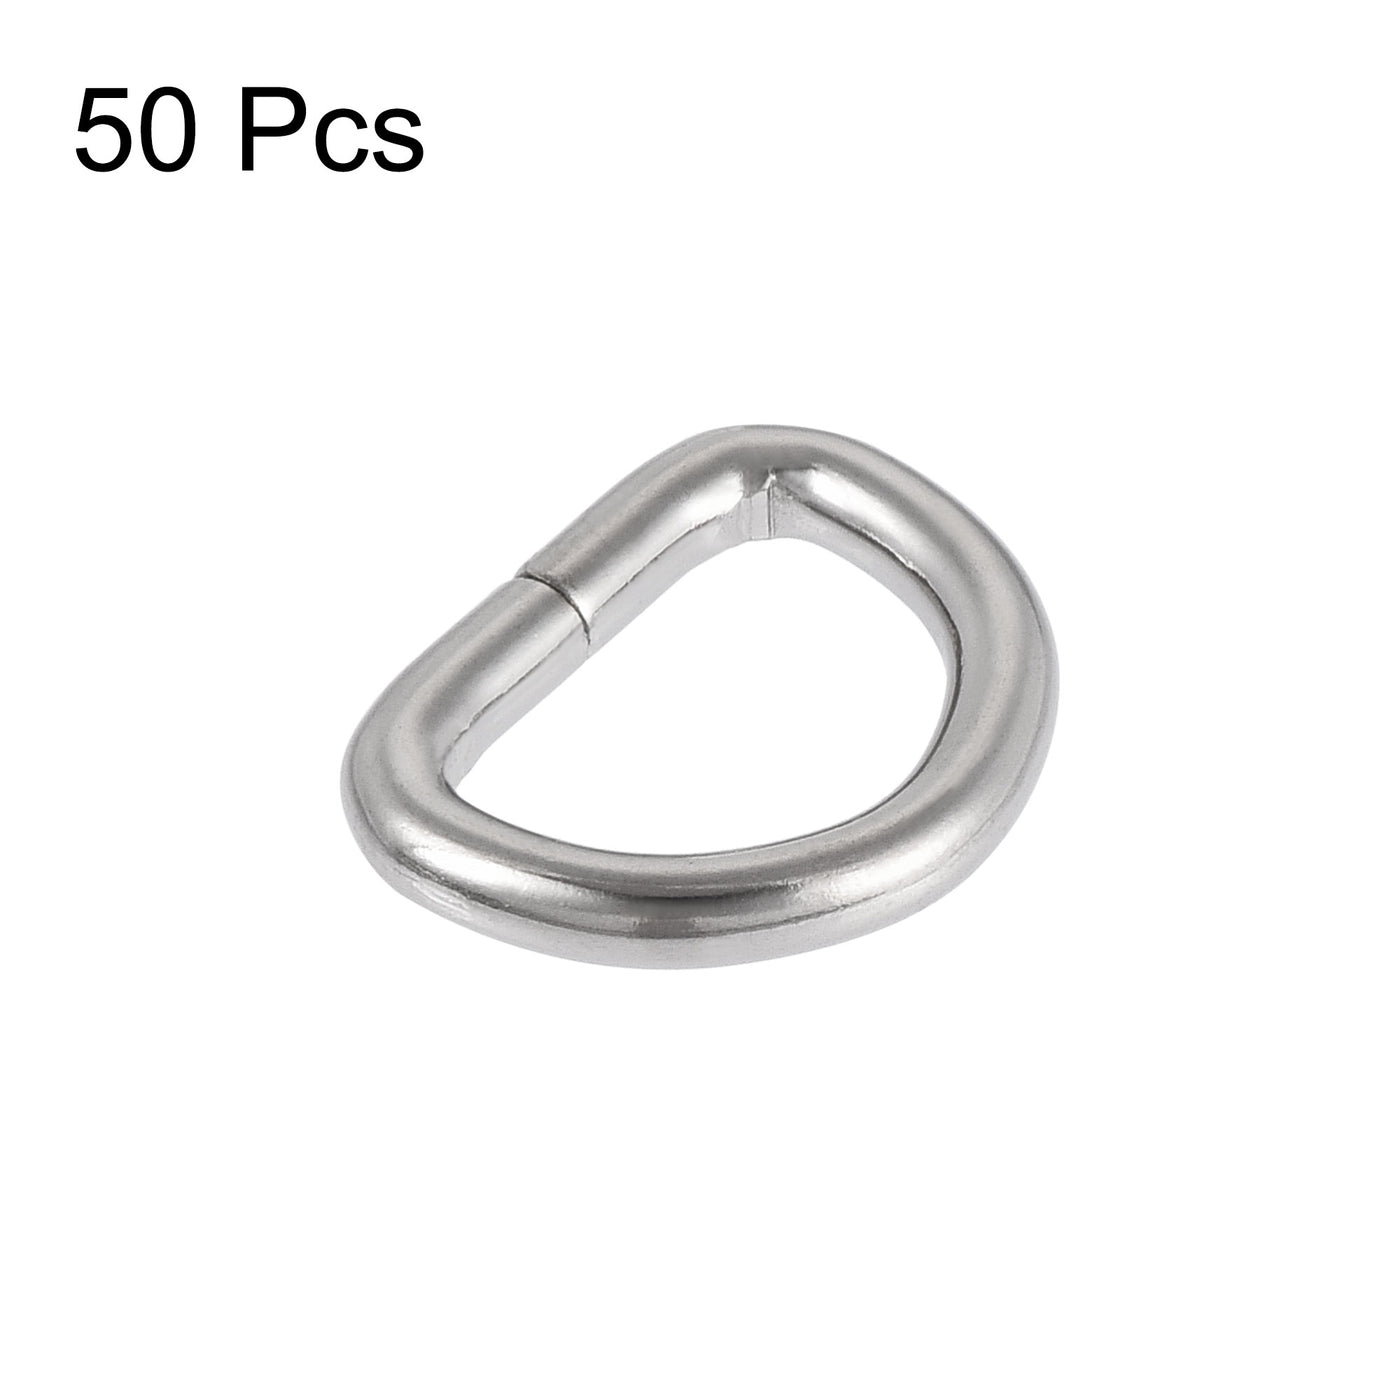 uxcell Uxcell Metal D Ring 0.51"(13mm) D-Rings Buckle for Hardware Bags Belts Craft DIY Accessories Silver Tone 50pcs